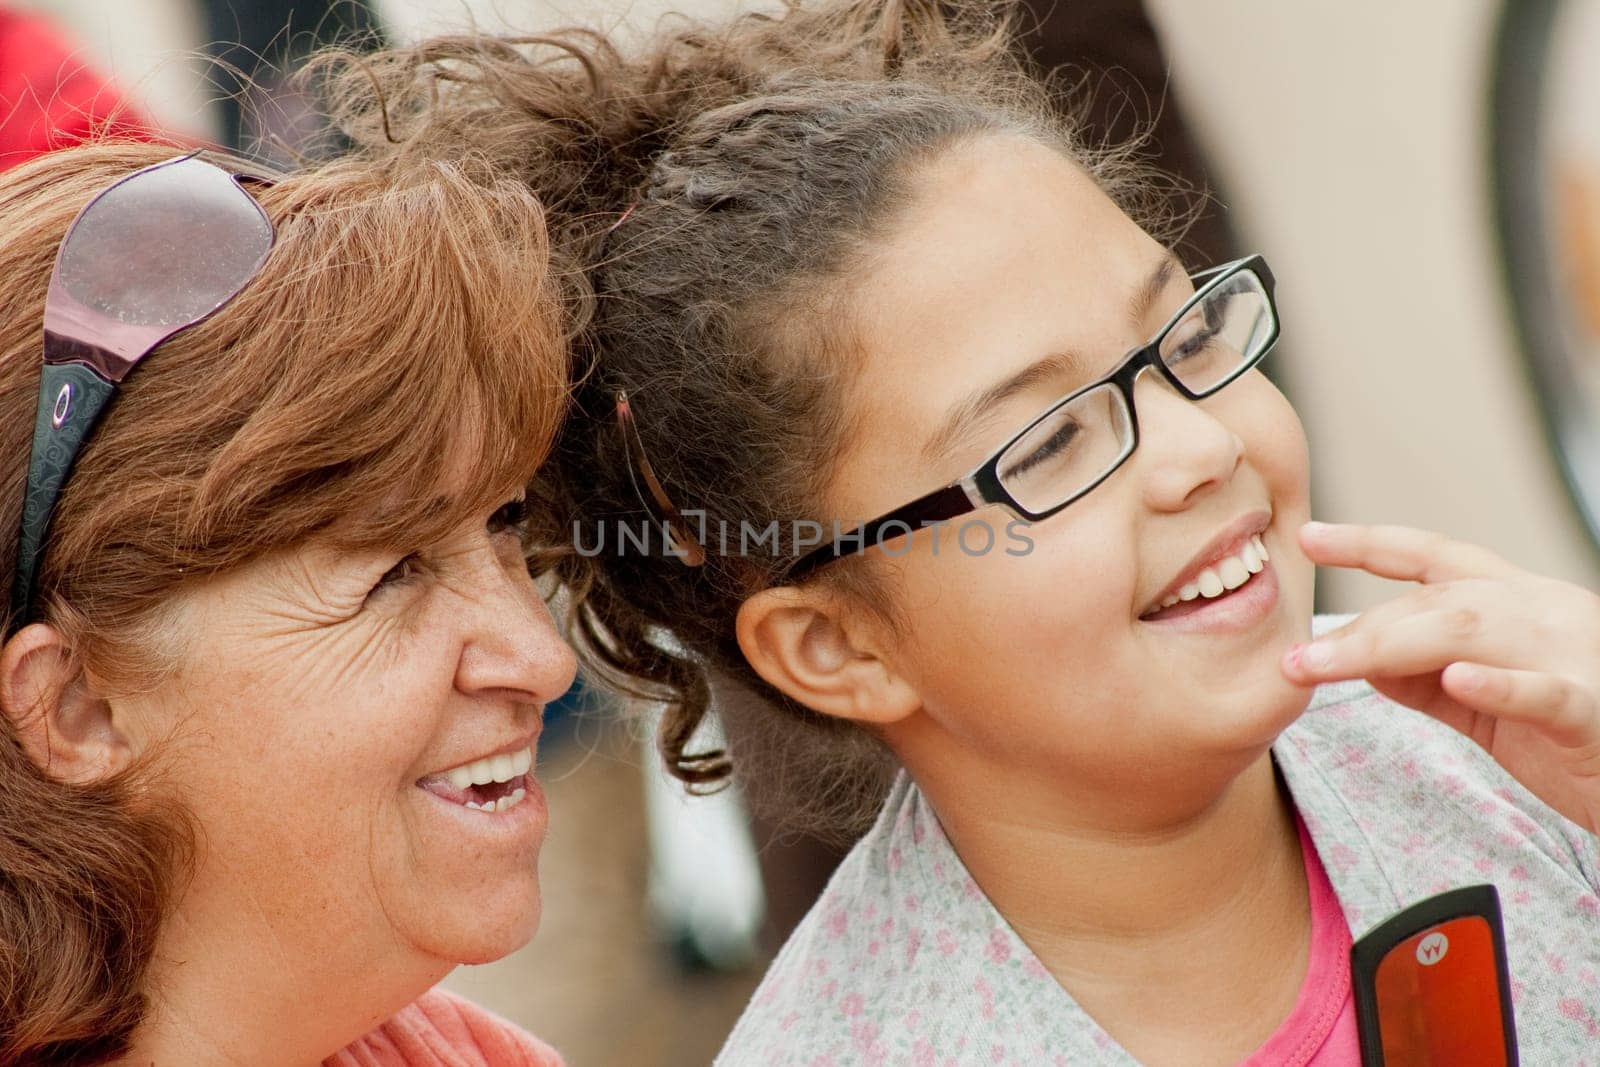 closeup of a mother and daughter in the street together smiling and looking at the same place. the two people are wearing glasses